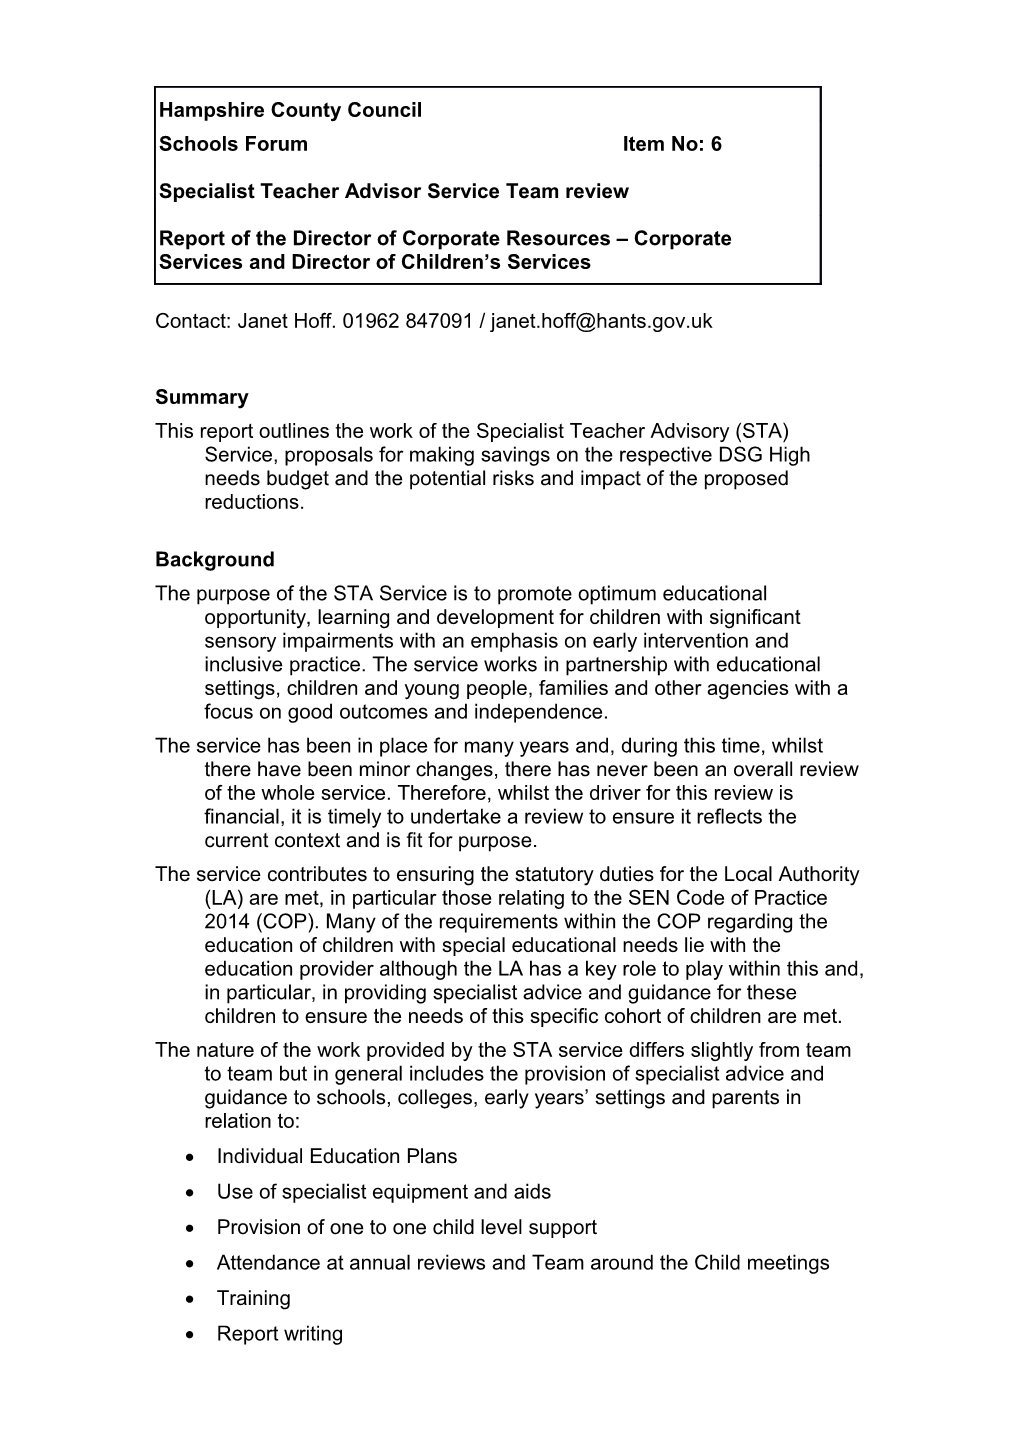 1.1This Report Outlines the Work of the Specialist Teacher Advisory (STA) Service, Proposals